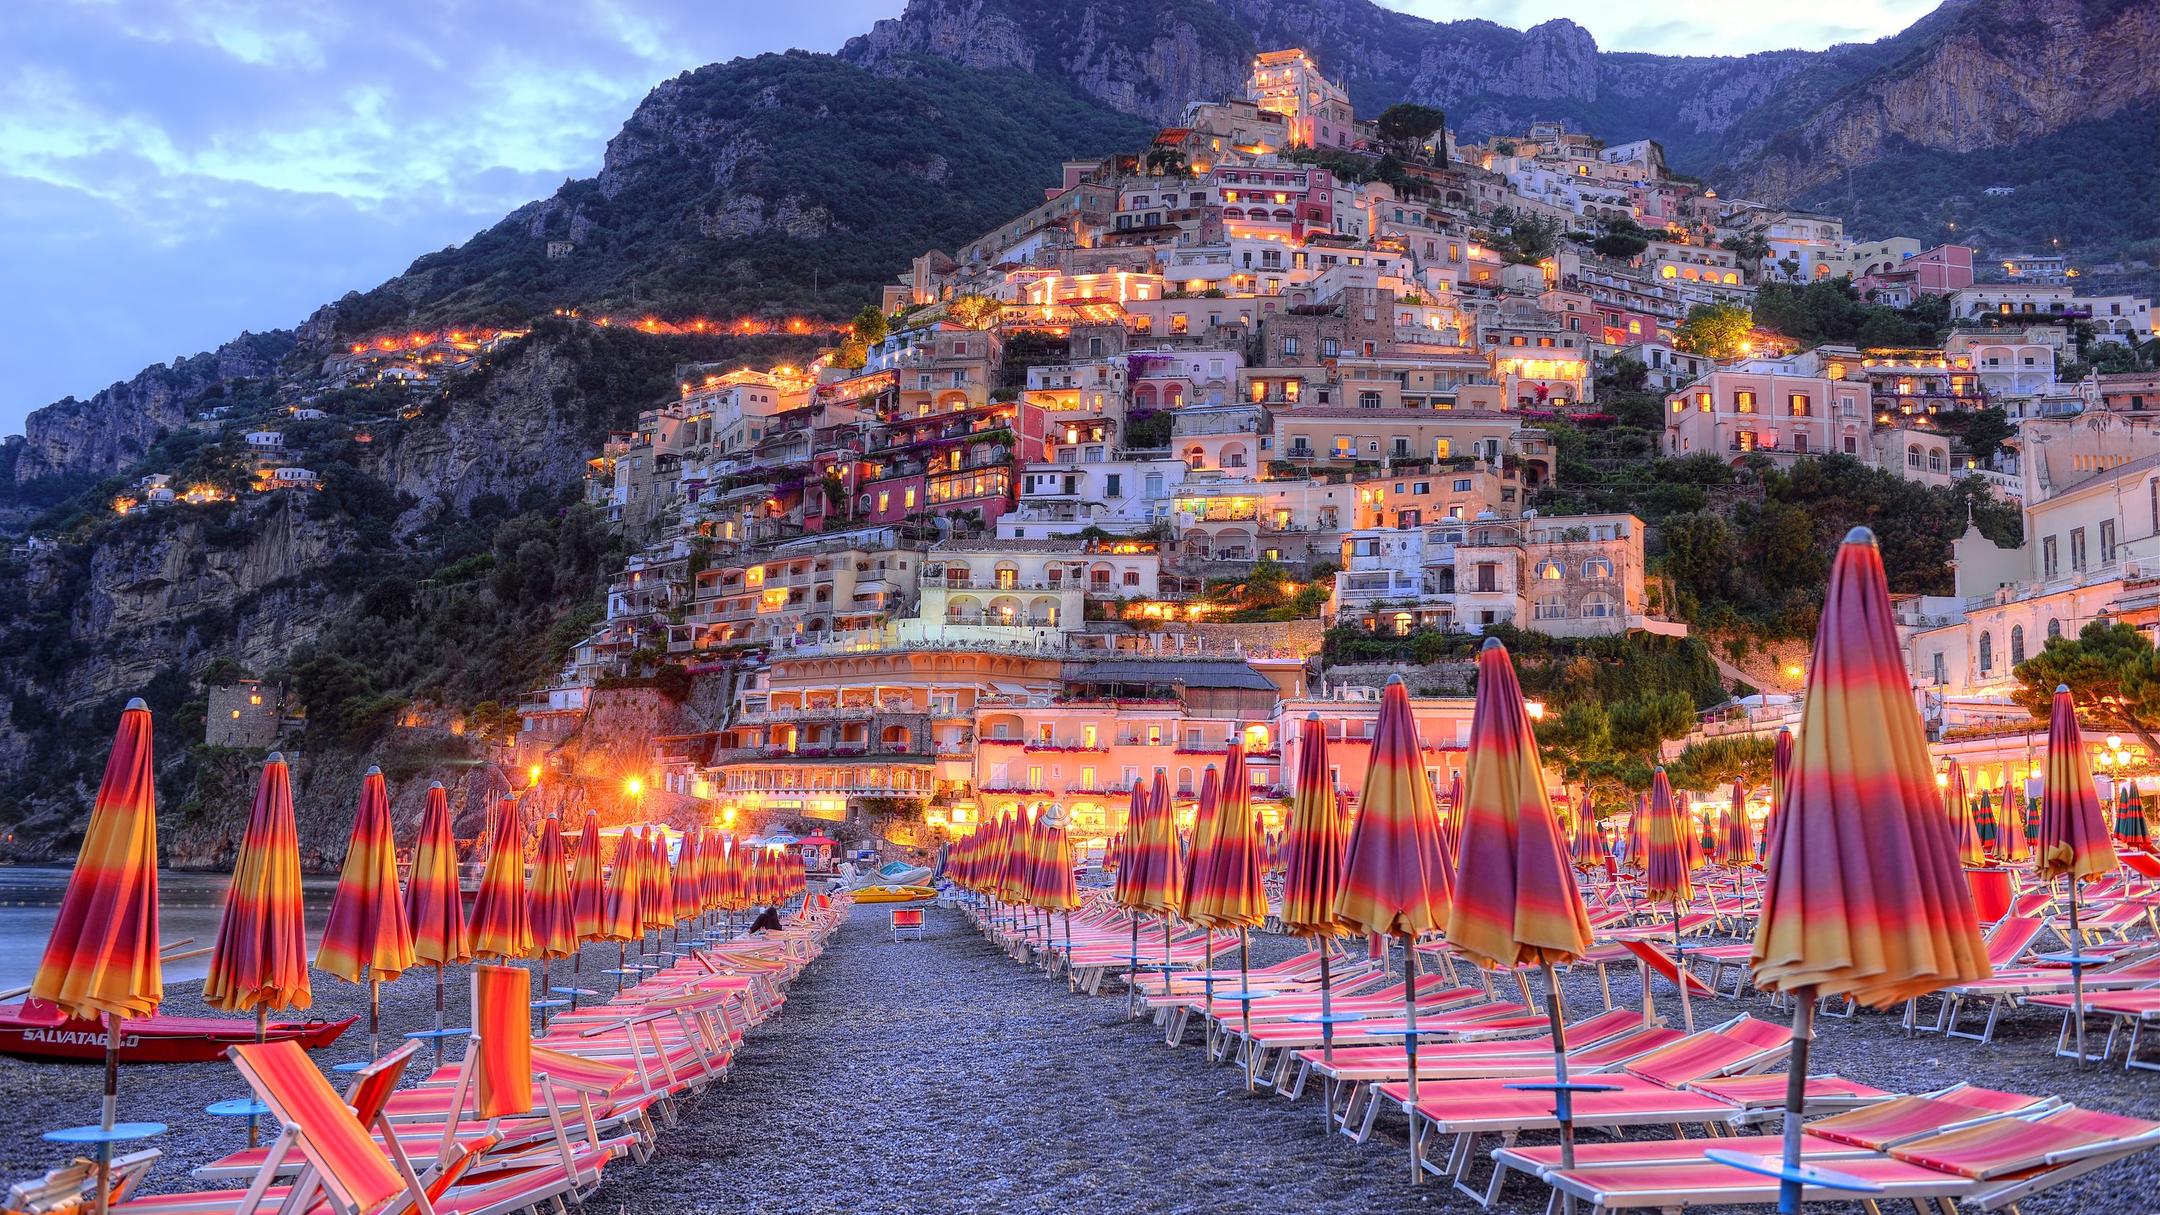 positano italy travel packages